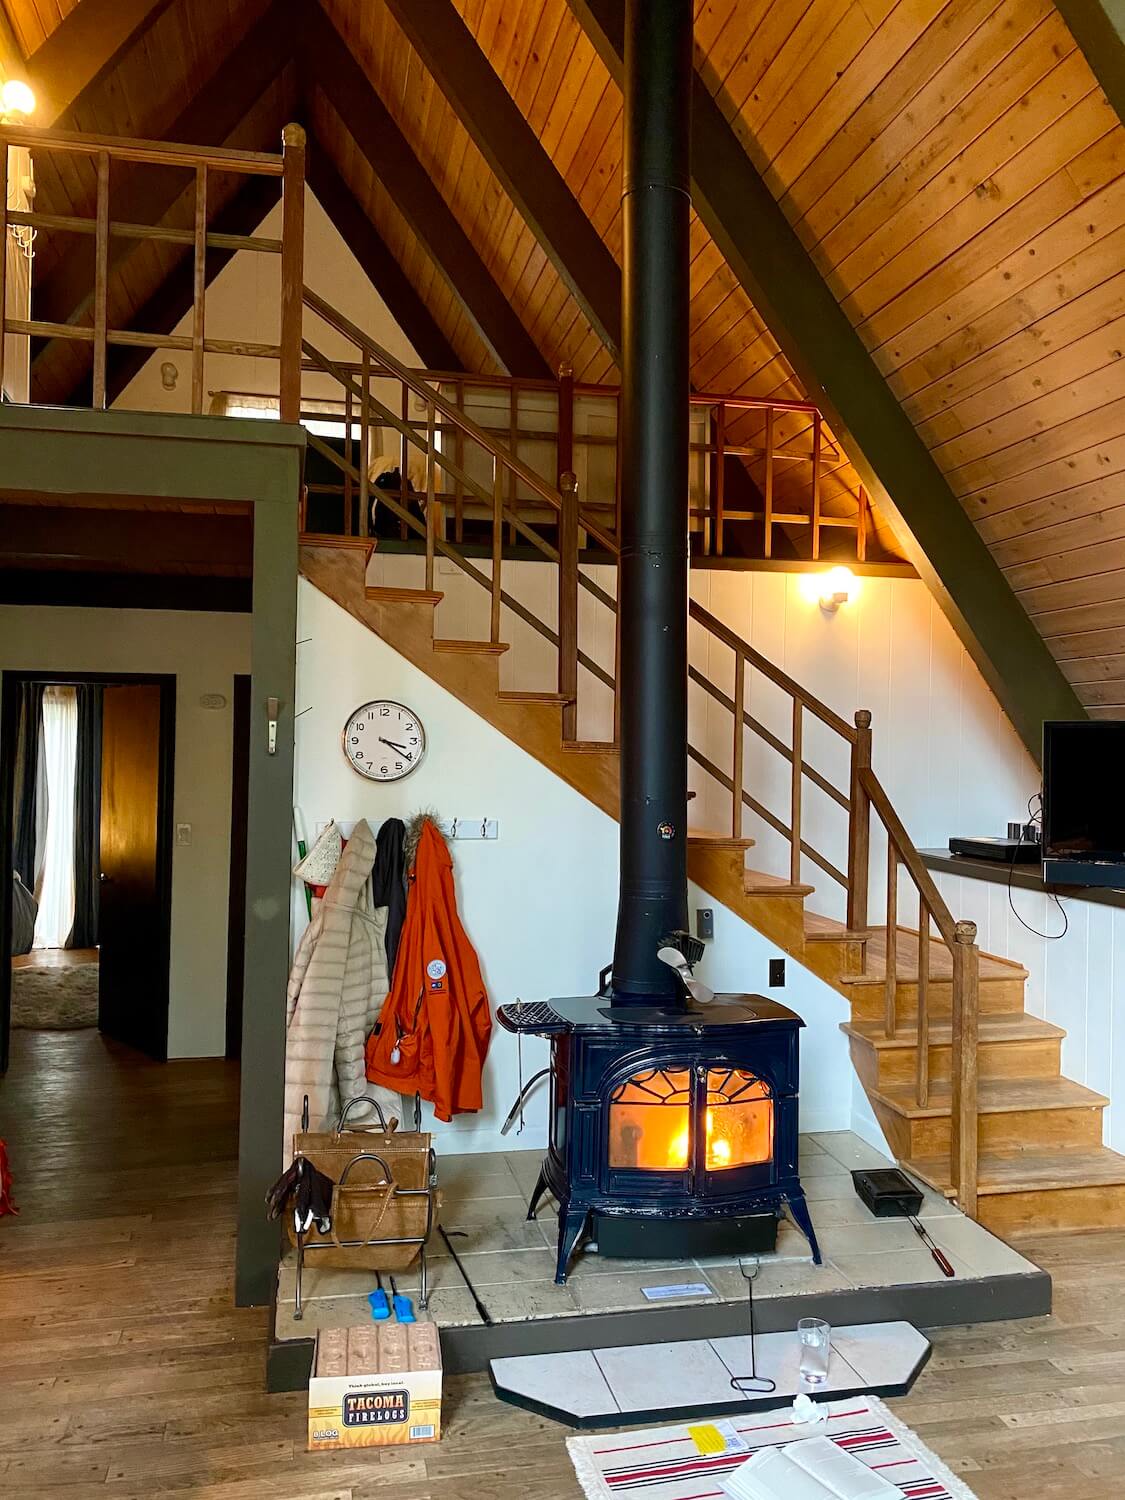 A fire roars inside a metal stove inside an a-frame cabin as wooden stairs lead up to a loft area in the space.  A clock on the wall says 3:20 and there are coats hung up on a coat rack. 